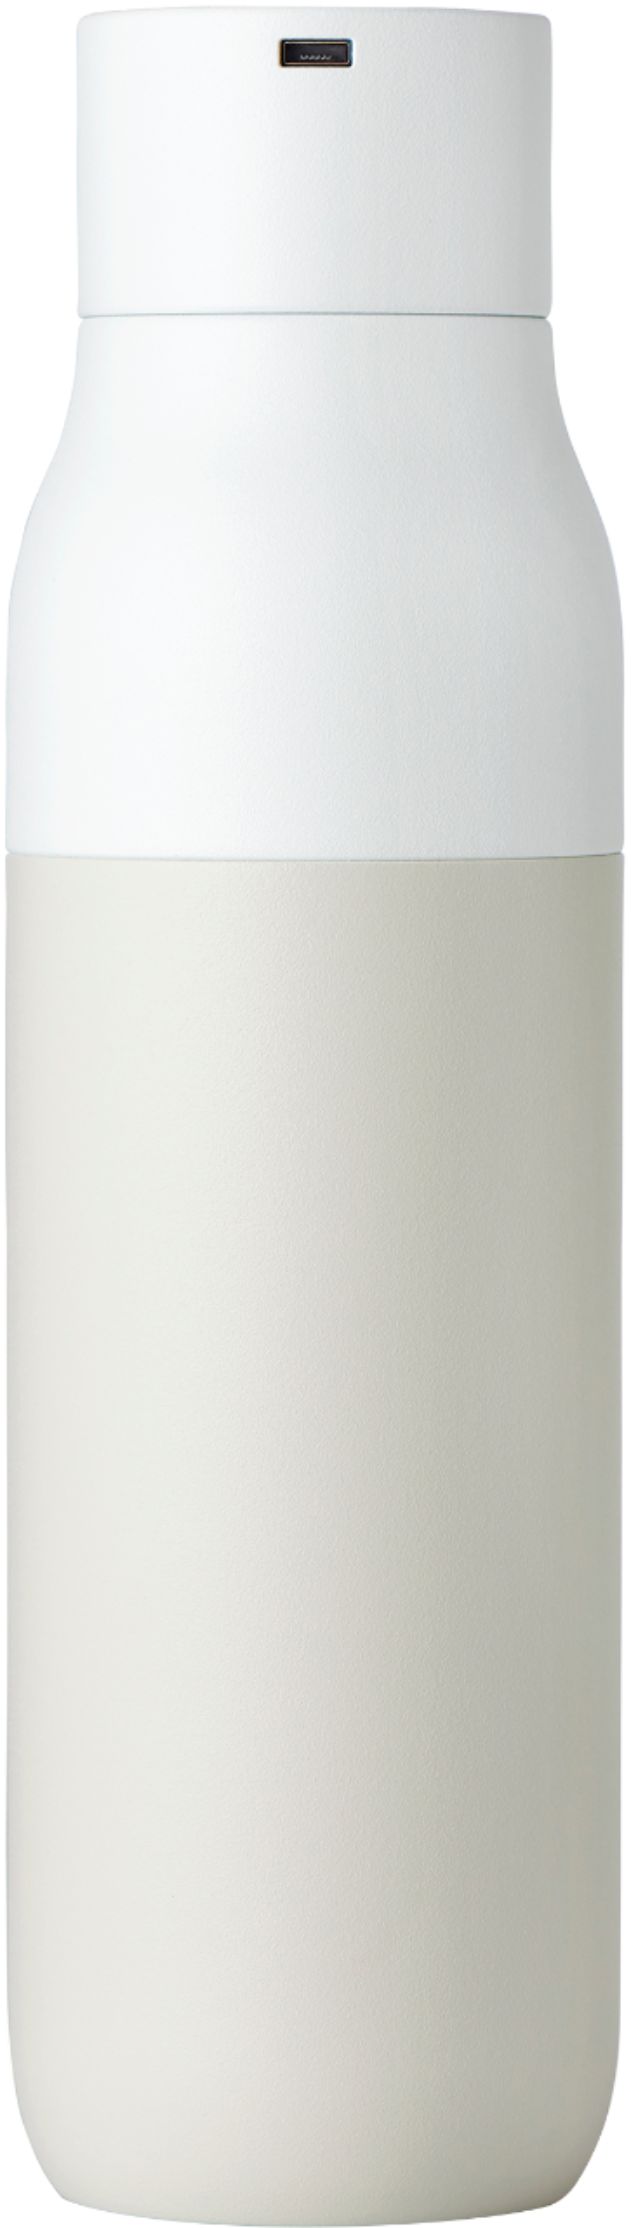 Self-Cleaning and Insulated Stainless Steel Water Bottle with UV Water  Sanitizer17oz, Black | Shell Water Systems